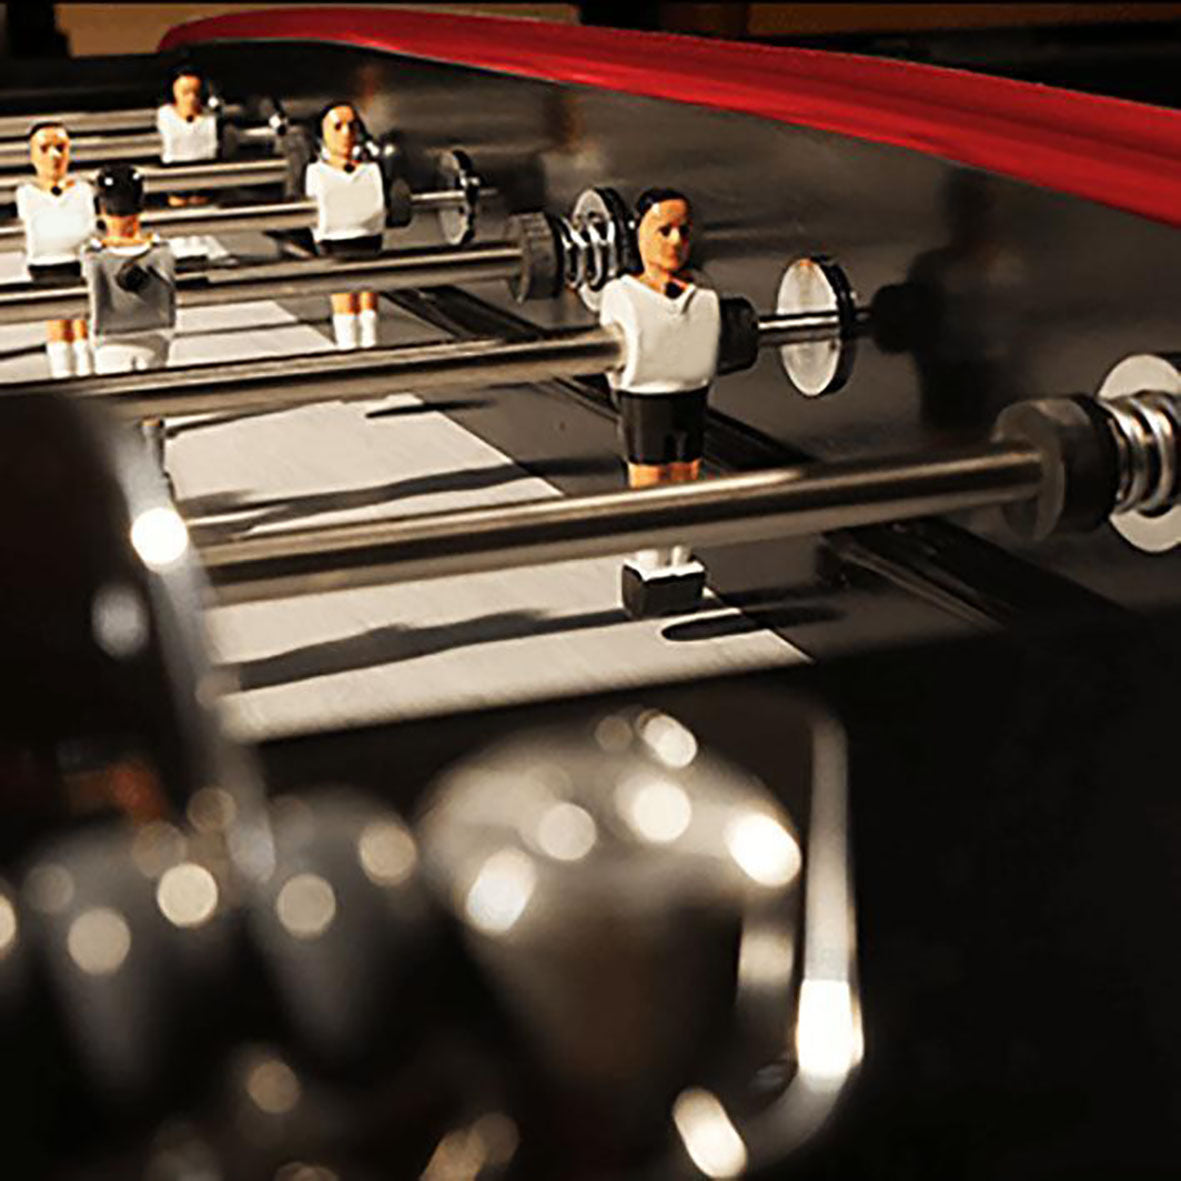 Rock-Ola Authentic Foosball Table in Black and Red - ***DOWN TO THE LAST 1 ACT NOW***